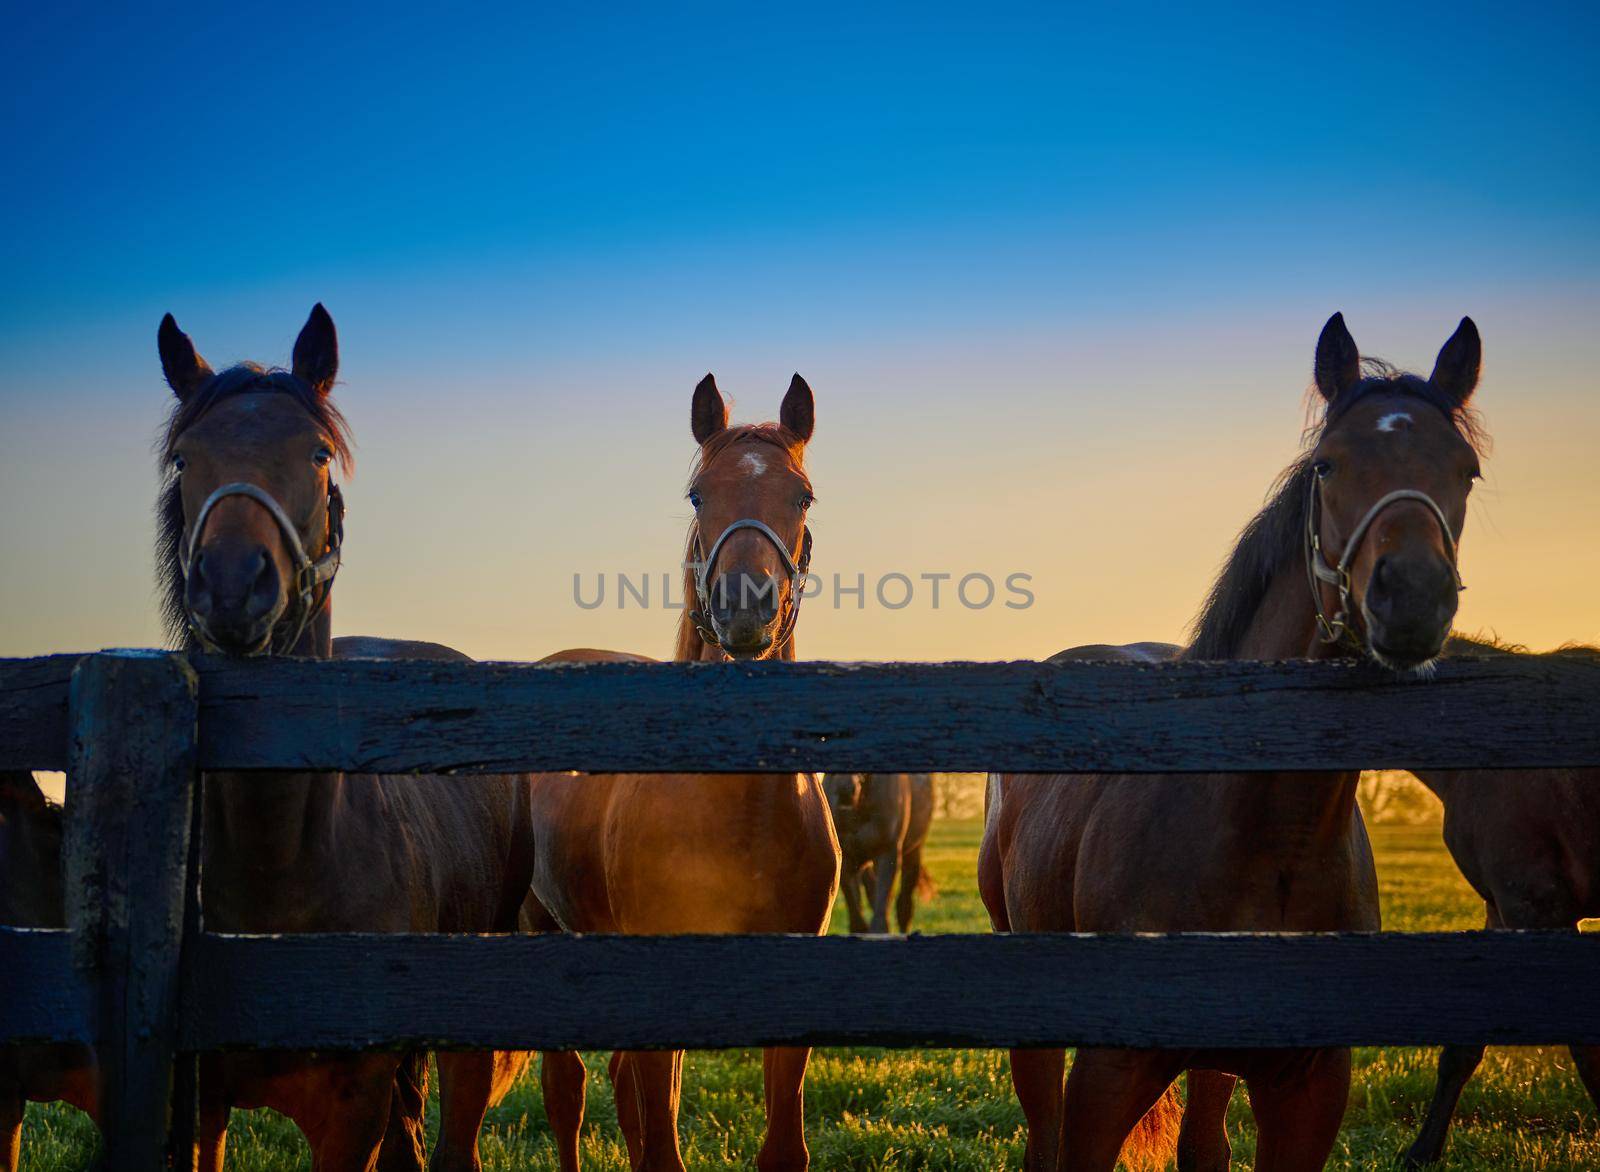 Group of horses staring at the camera  along wooden fence.